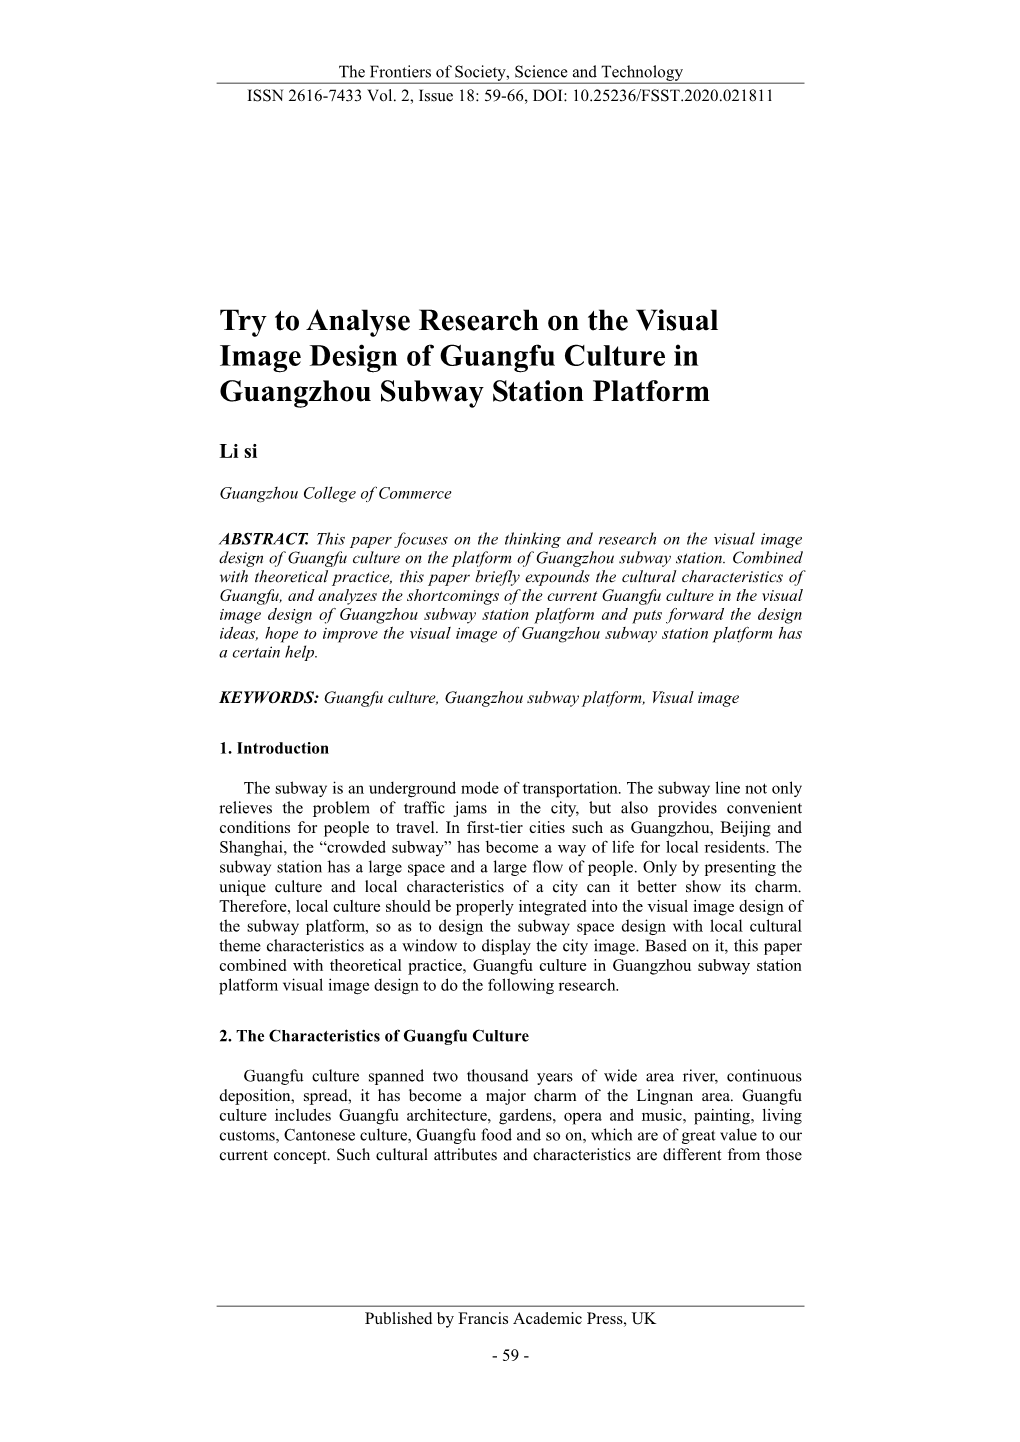 Try to Analyse Research on the Visual Image Design of Guangfu Culture in Guangzhou Subway Station Platform